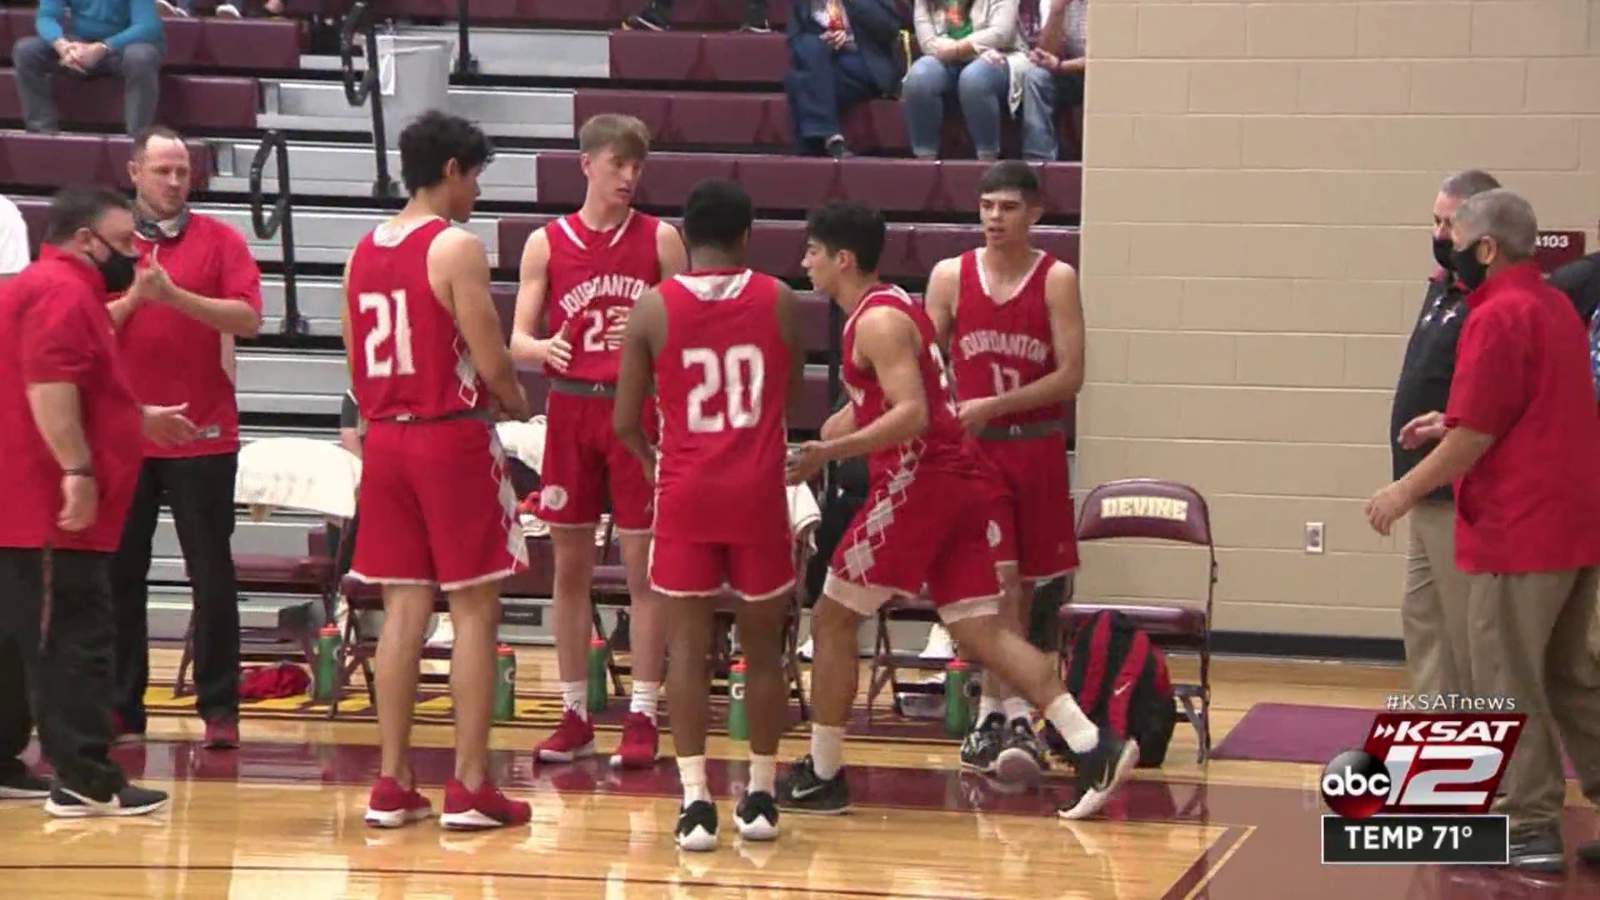 Schuchart’s late shot lifts Jourdanton boys to dramatic comeback victory over Marion